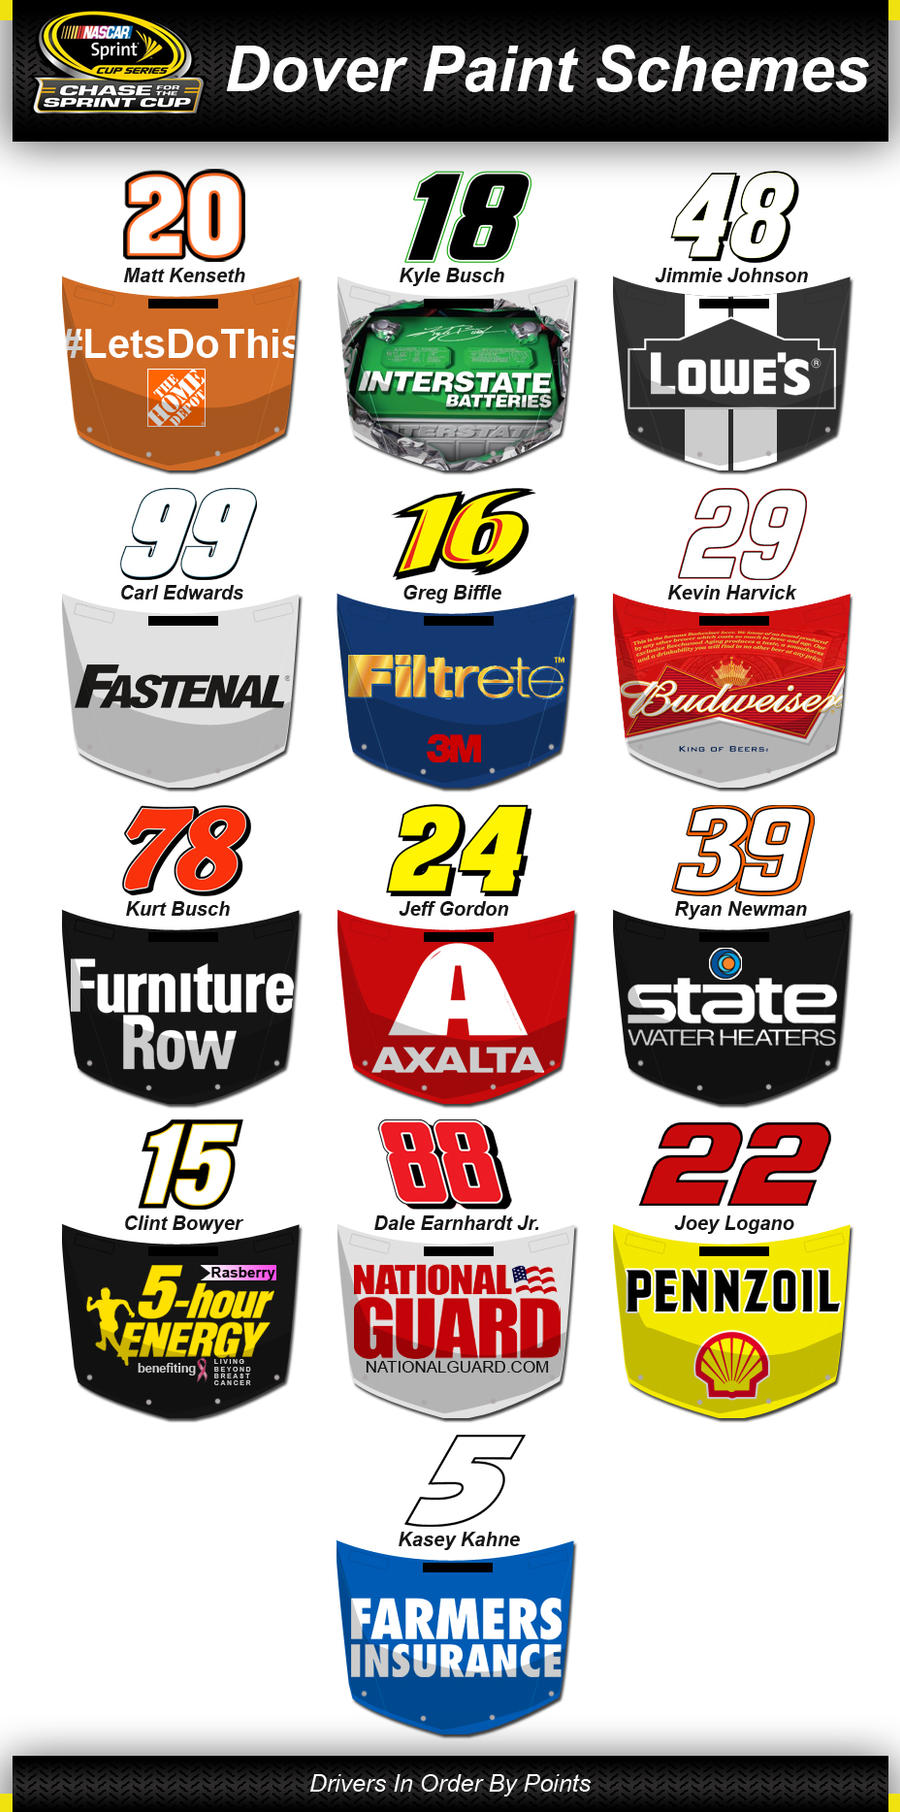 nascar_chase_for_the_sprint_cup_dover_hoods_by_weebo322-d6oh0ot.jpg